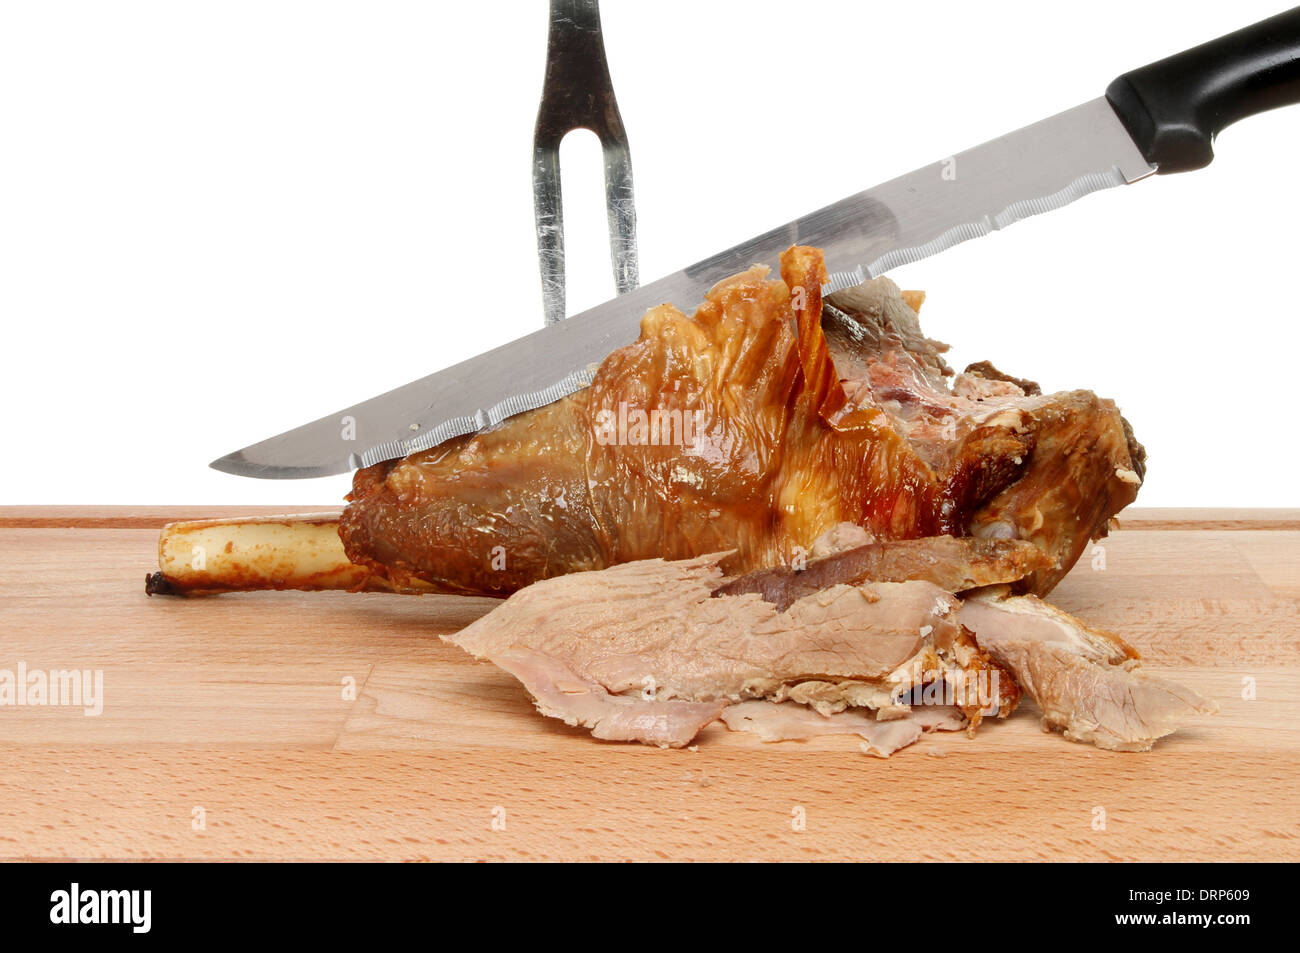 Carving roast leg of lamb joint on a wooden board Stock Photo